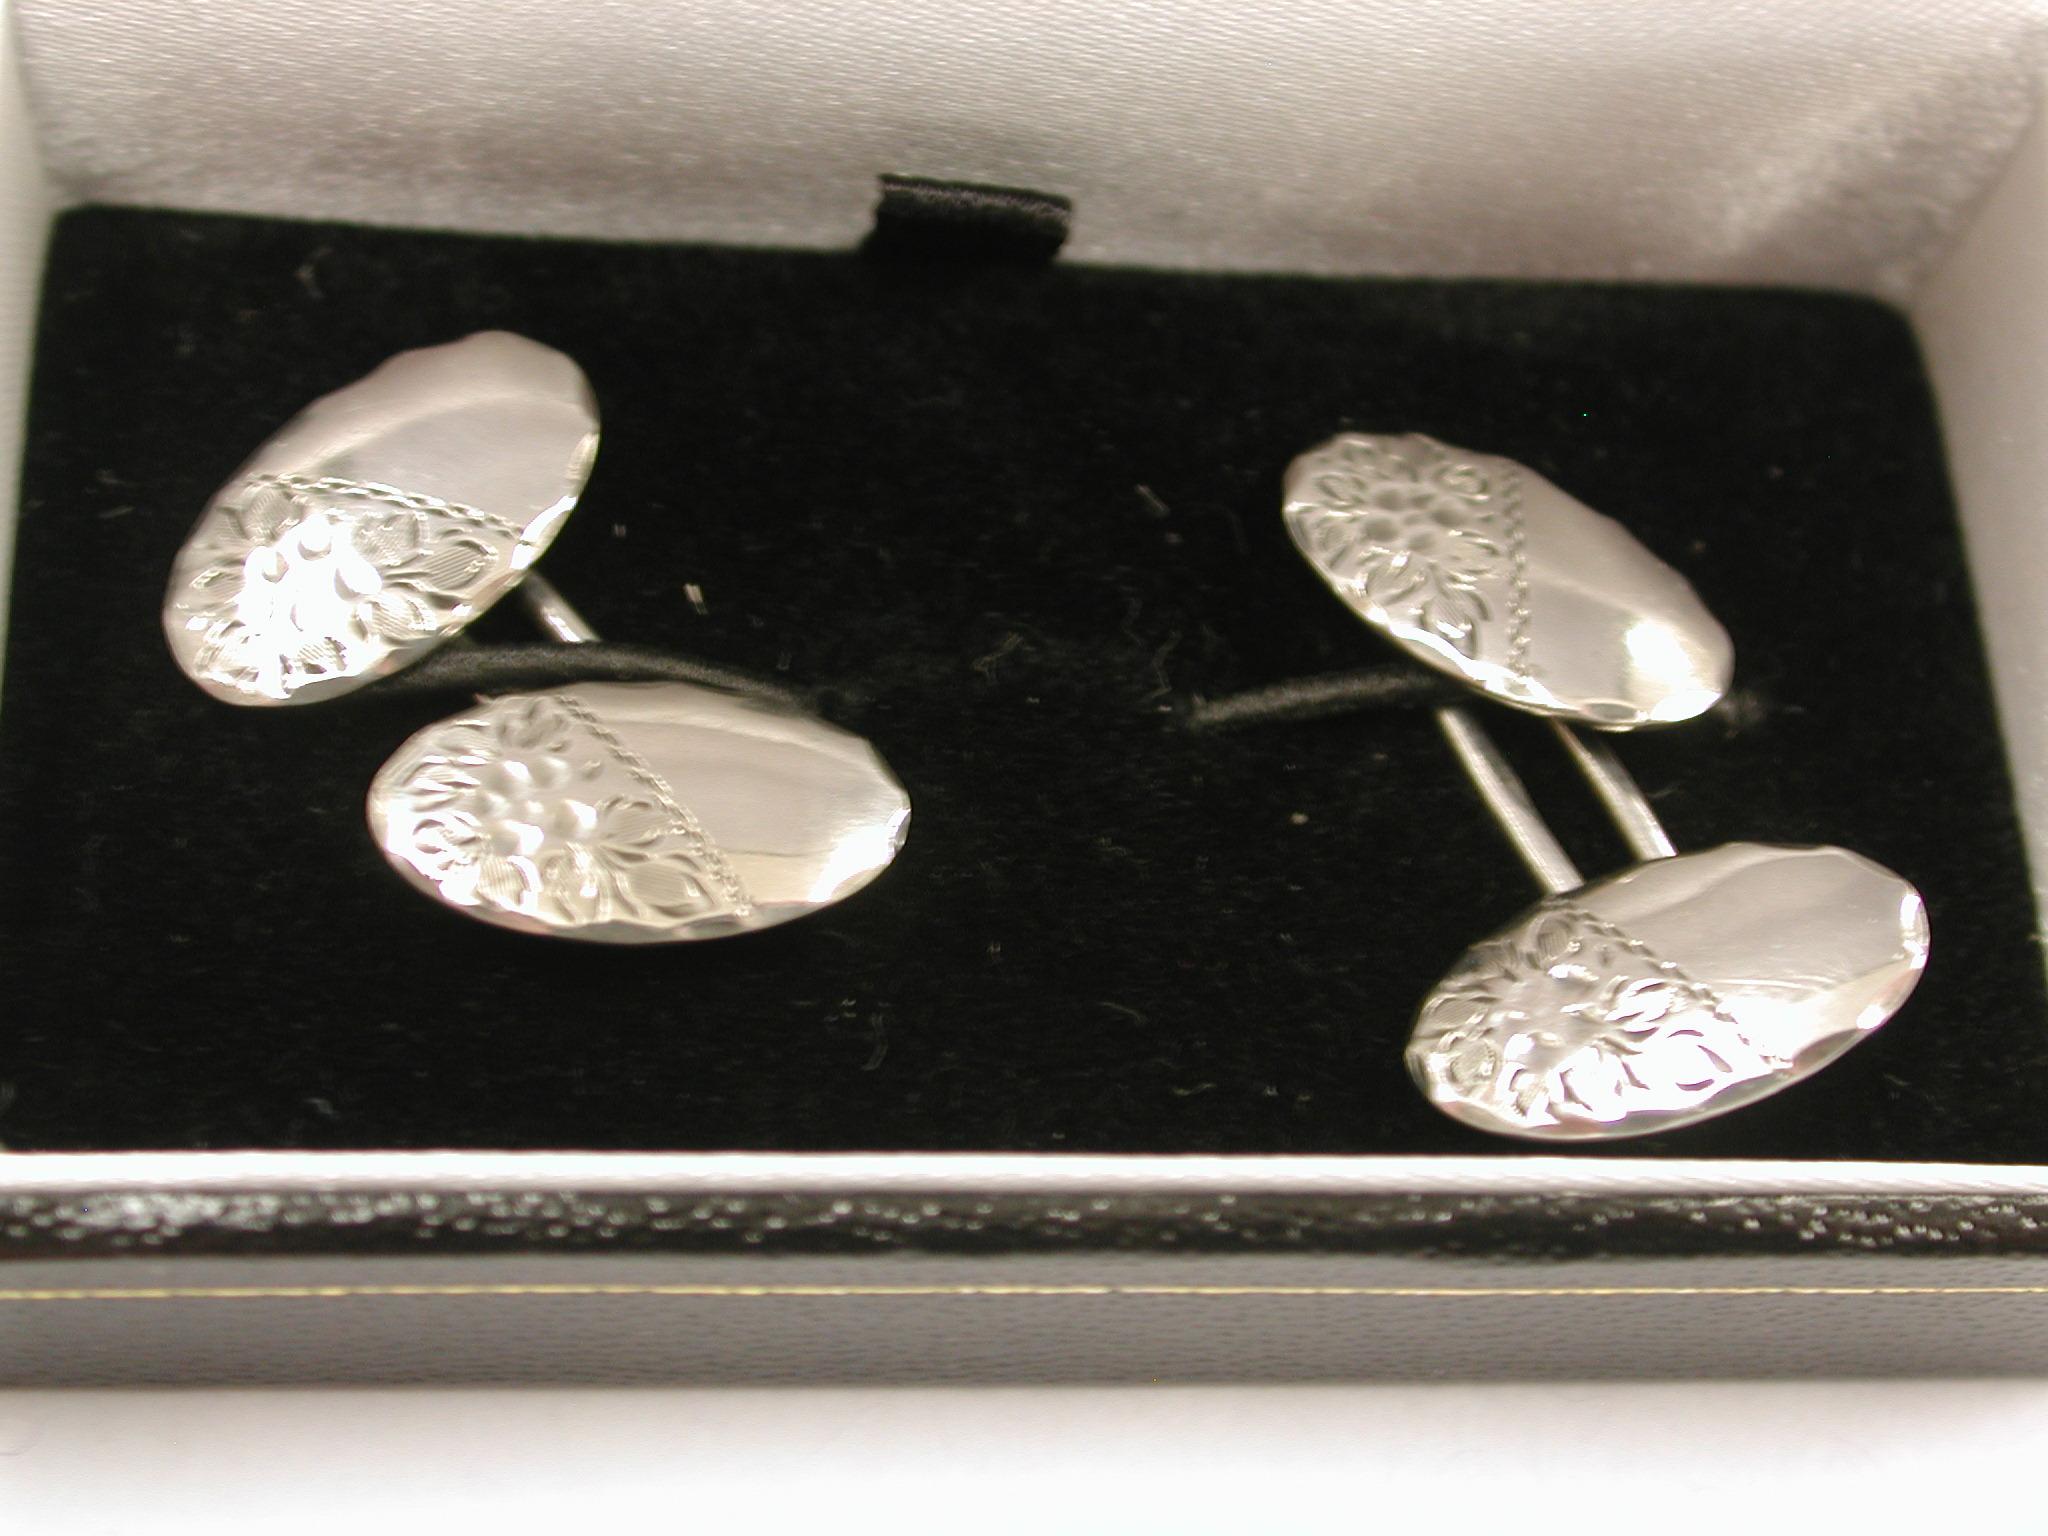 Pair Of Victorian Silver Cufflinks Dated 1899 London Chaplin & Sons
Good quality hand engraved antique oval silver cufflinks